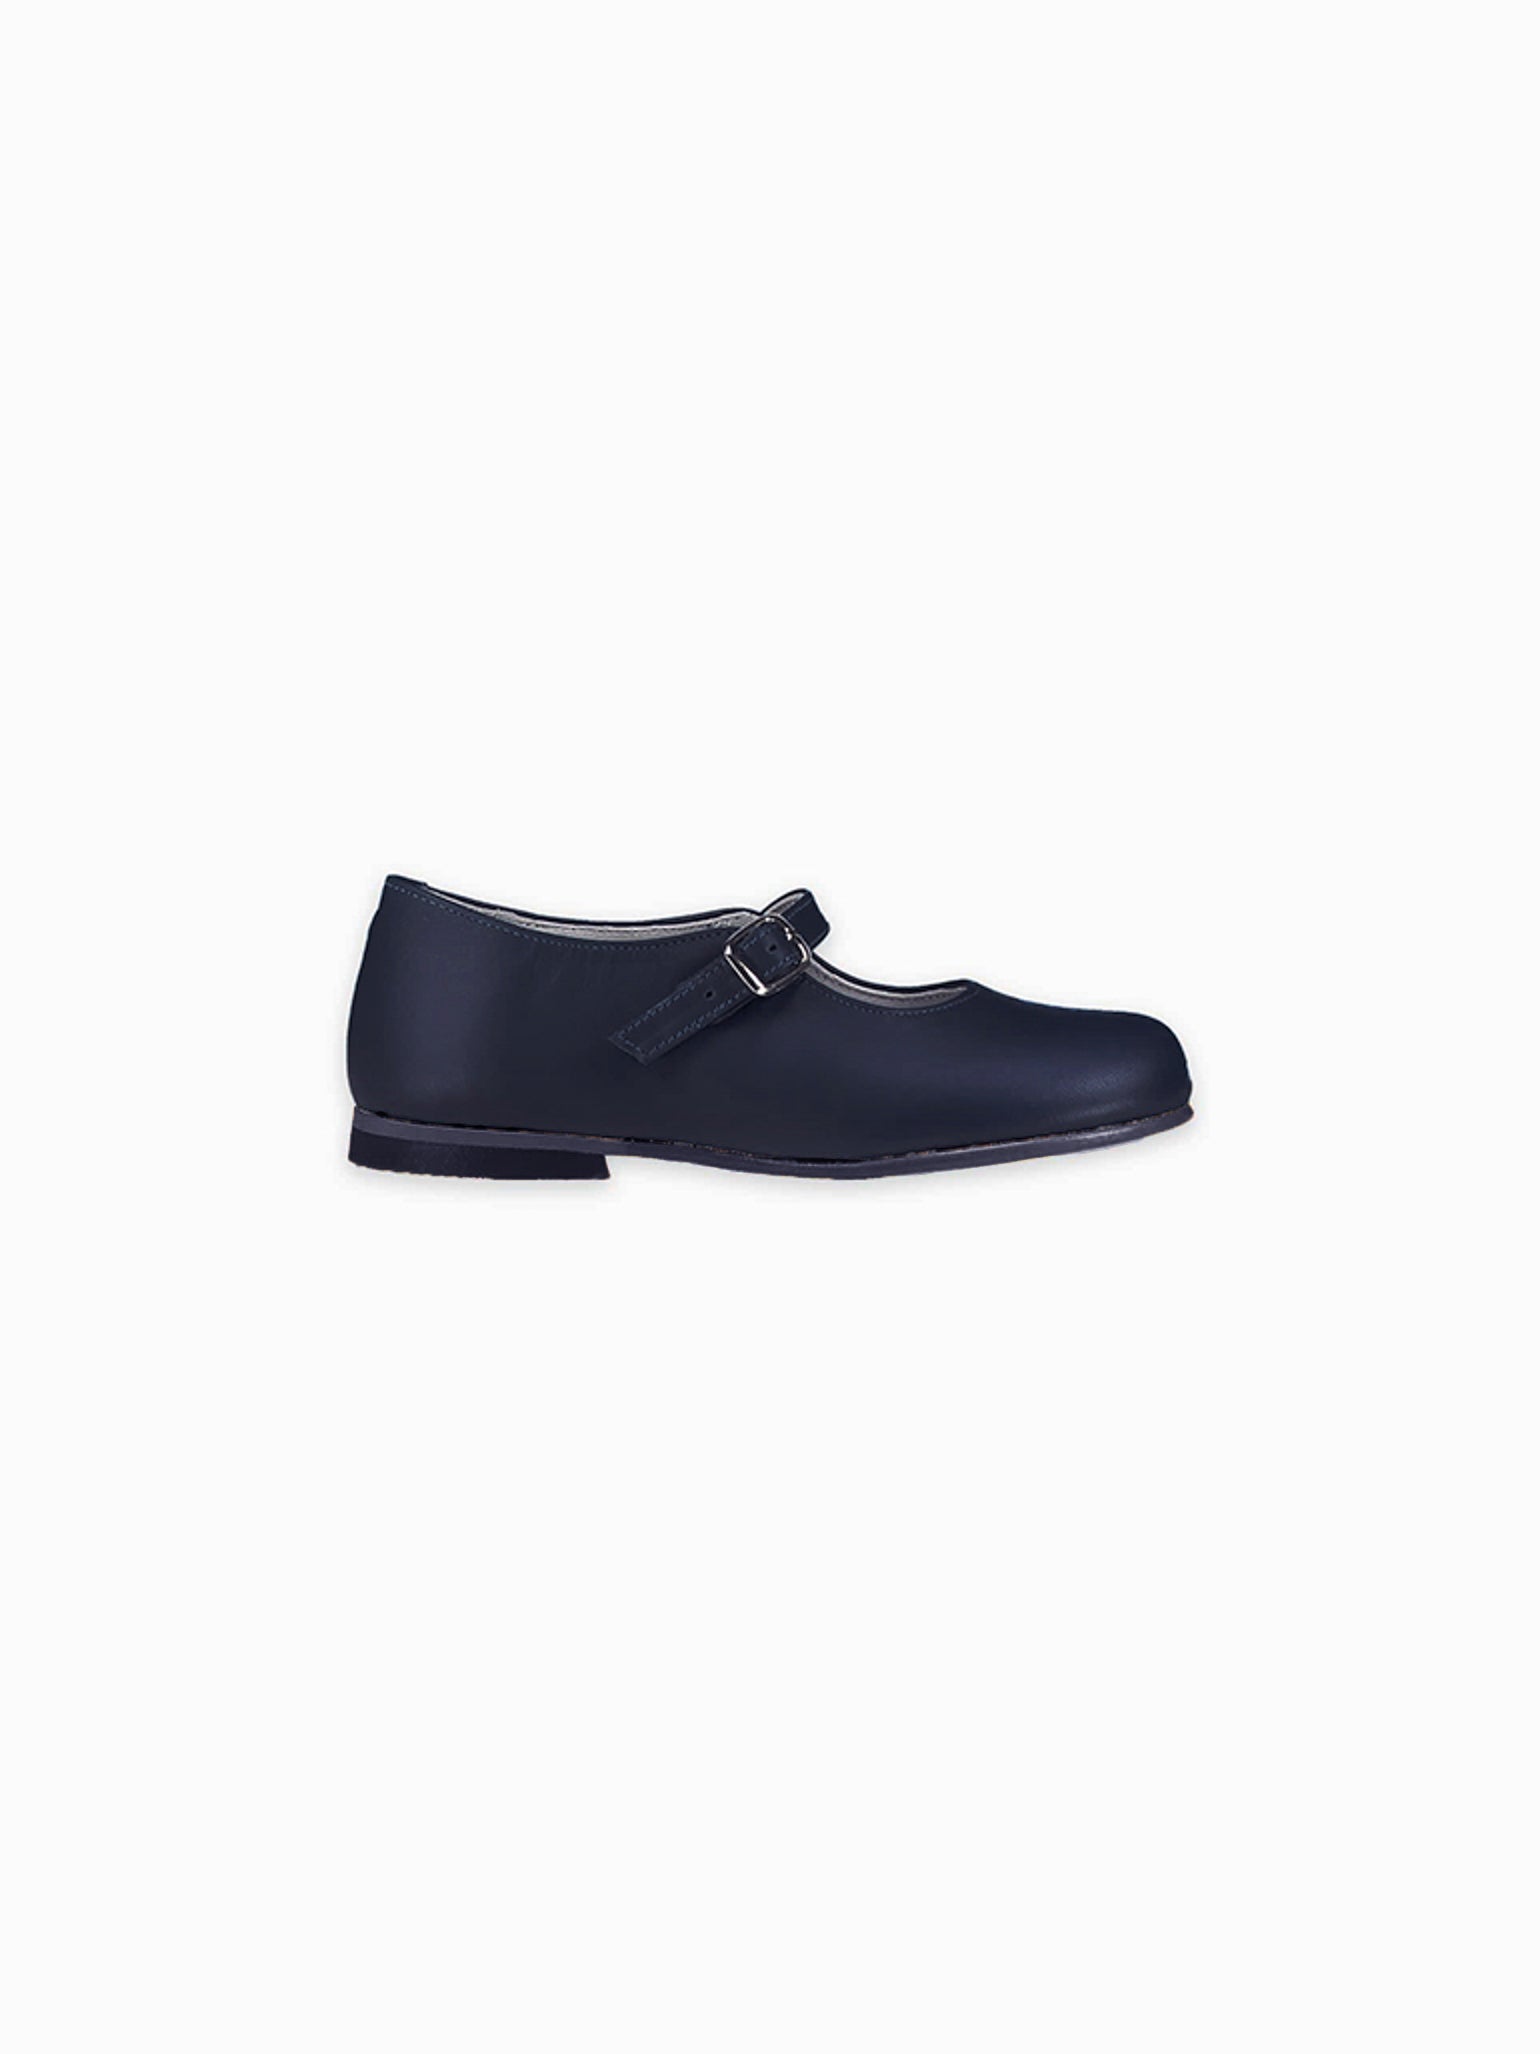 Women's Slip On Shoes - Smart & Casual Slip On Shoes | Pavers™ Ireland